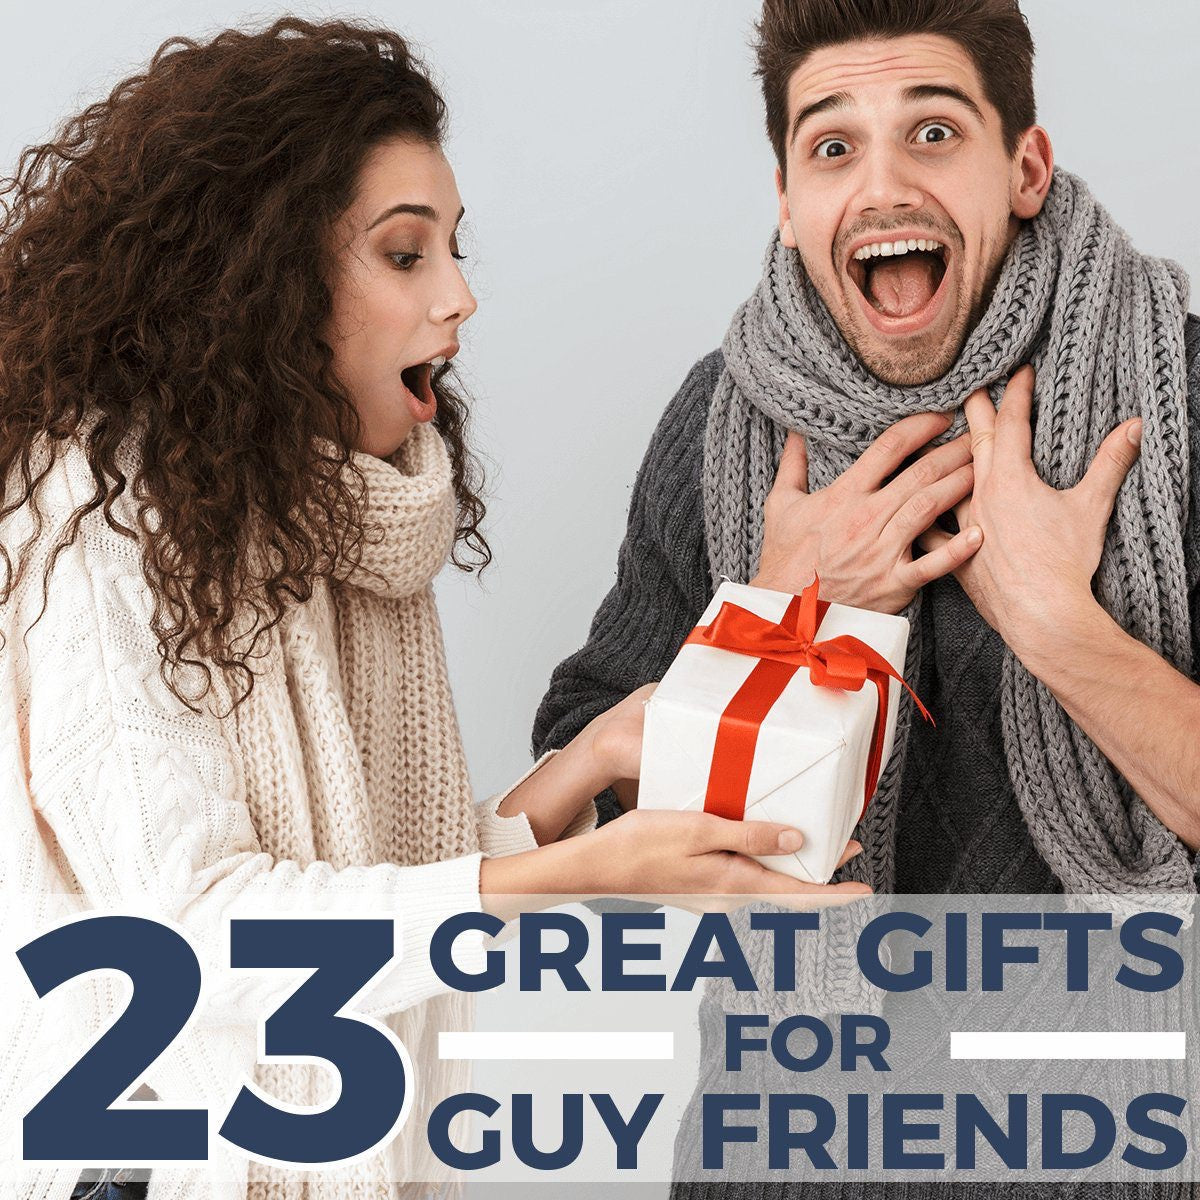 what to buy a guy friend for his birthday